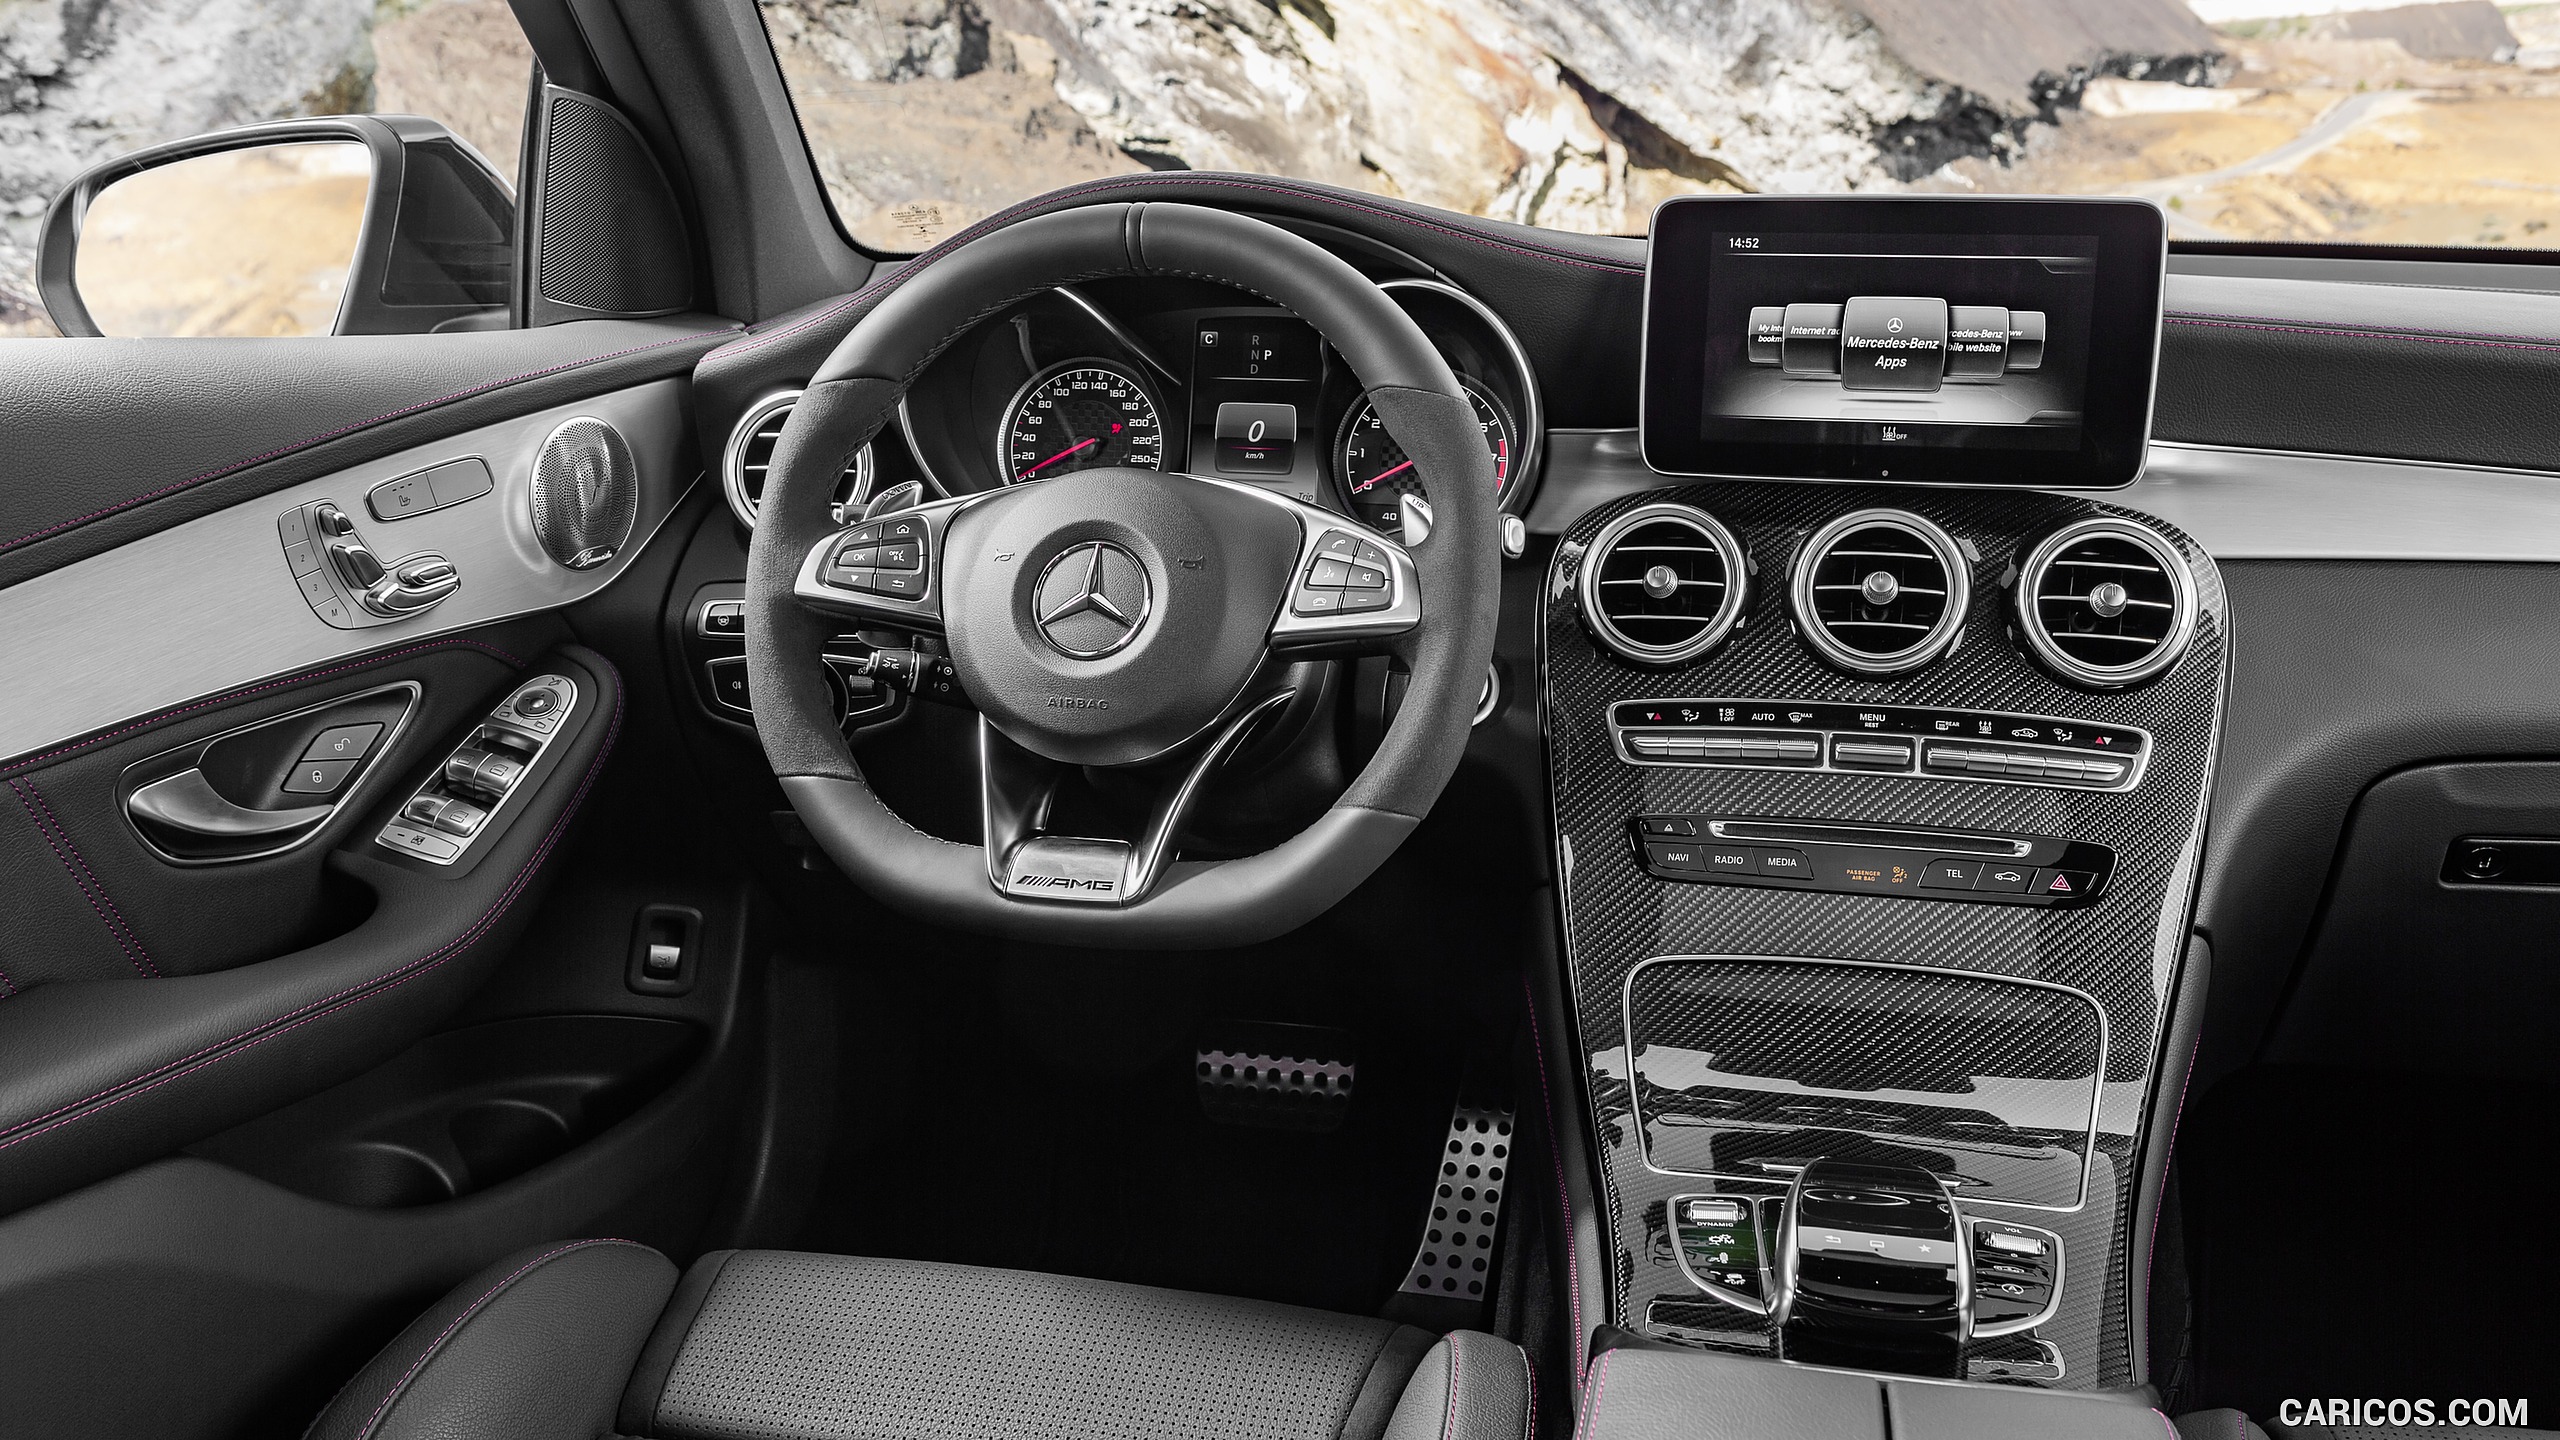 2017 Mercedes-AMG GLC 43 4MATIC (Chassis: X253) - Leather Black Interior with Performace Seats, Cockpit, #26 of 108